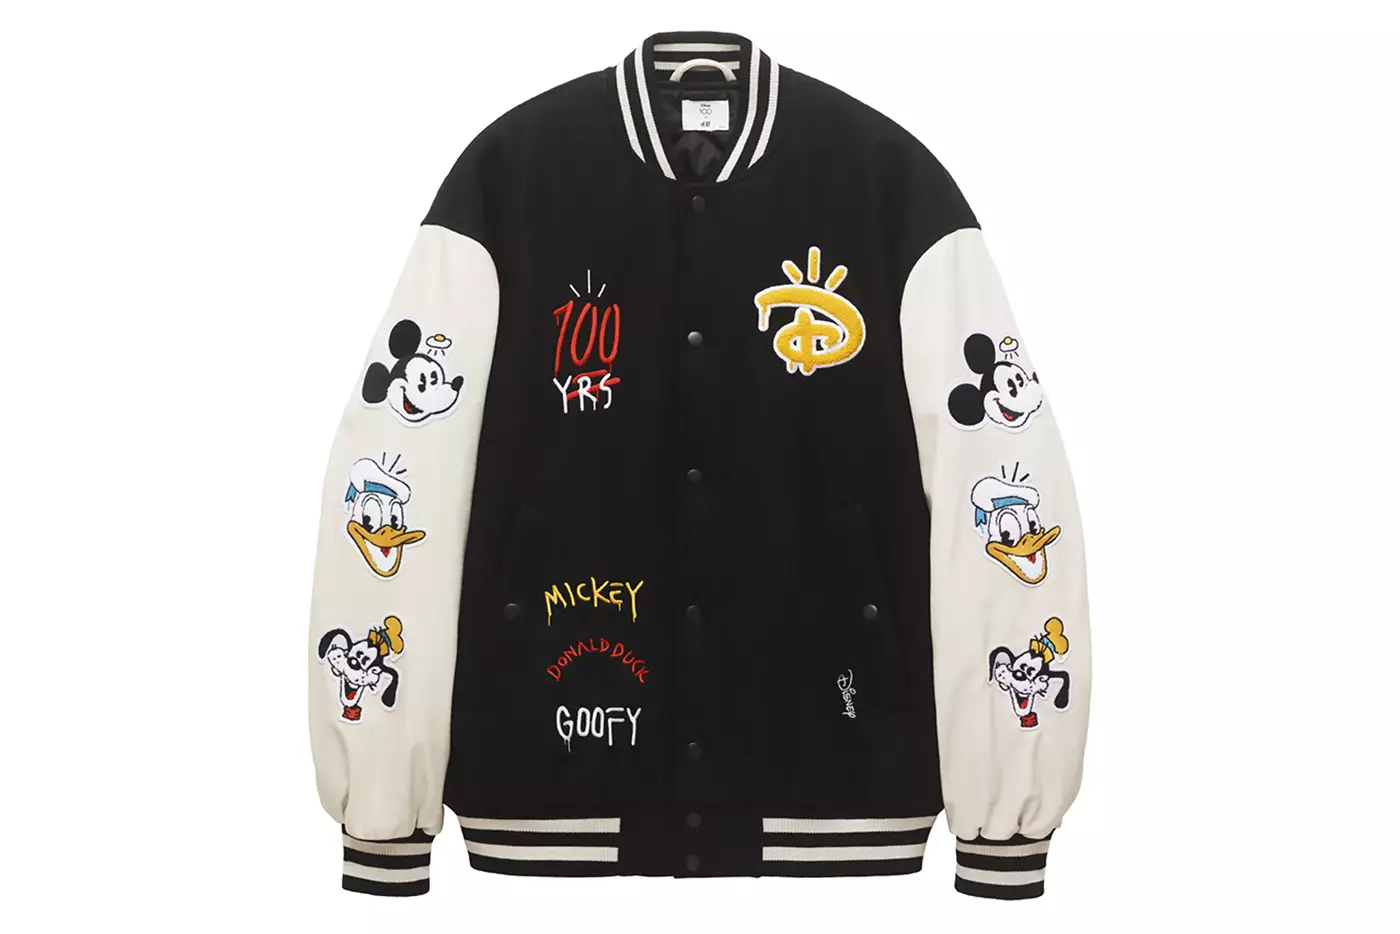 H&M x GucciGhost - Disney 100th Anniversary Collection